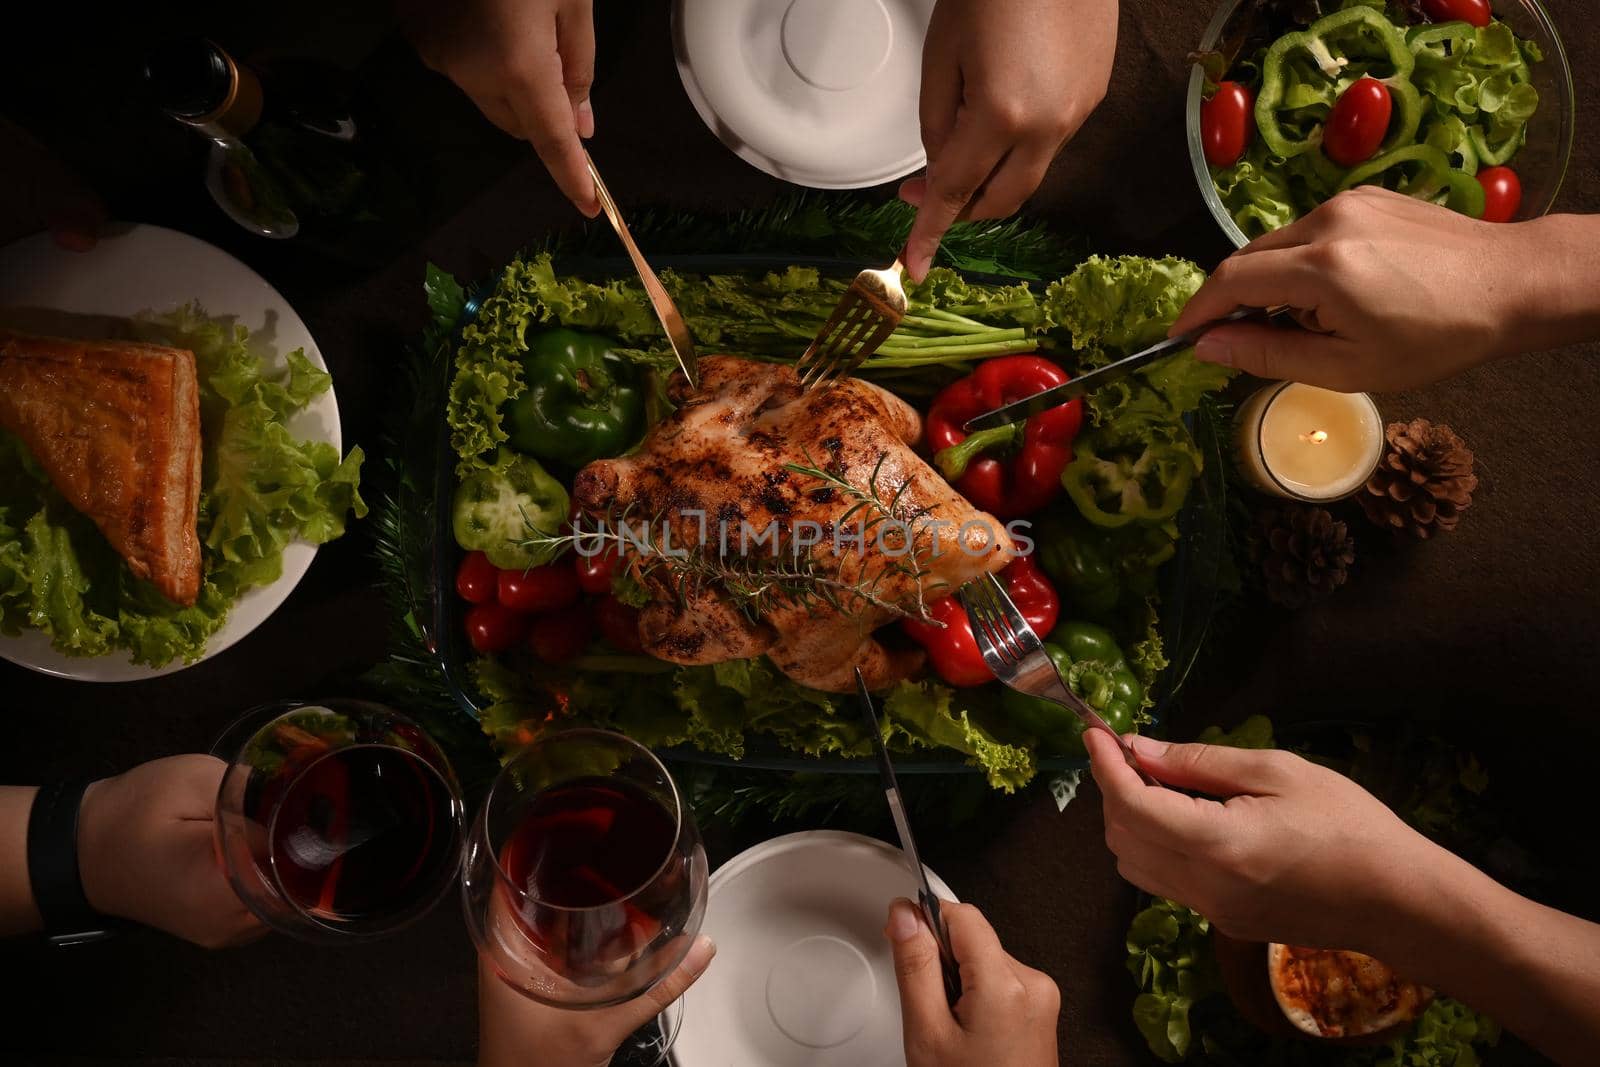 From above view group of friends or family enjoy eating roast turkey, Thanksgiving meal together. Celebration, holidays and Christmas concept.